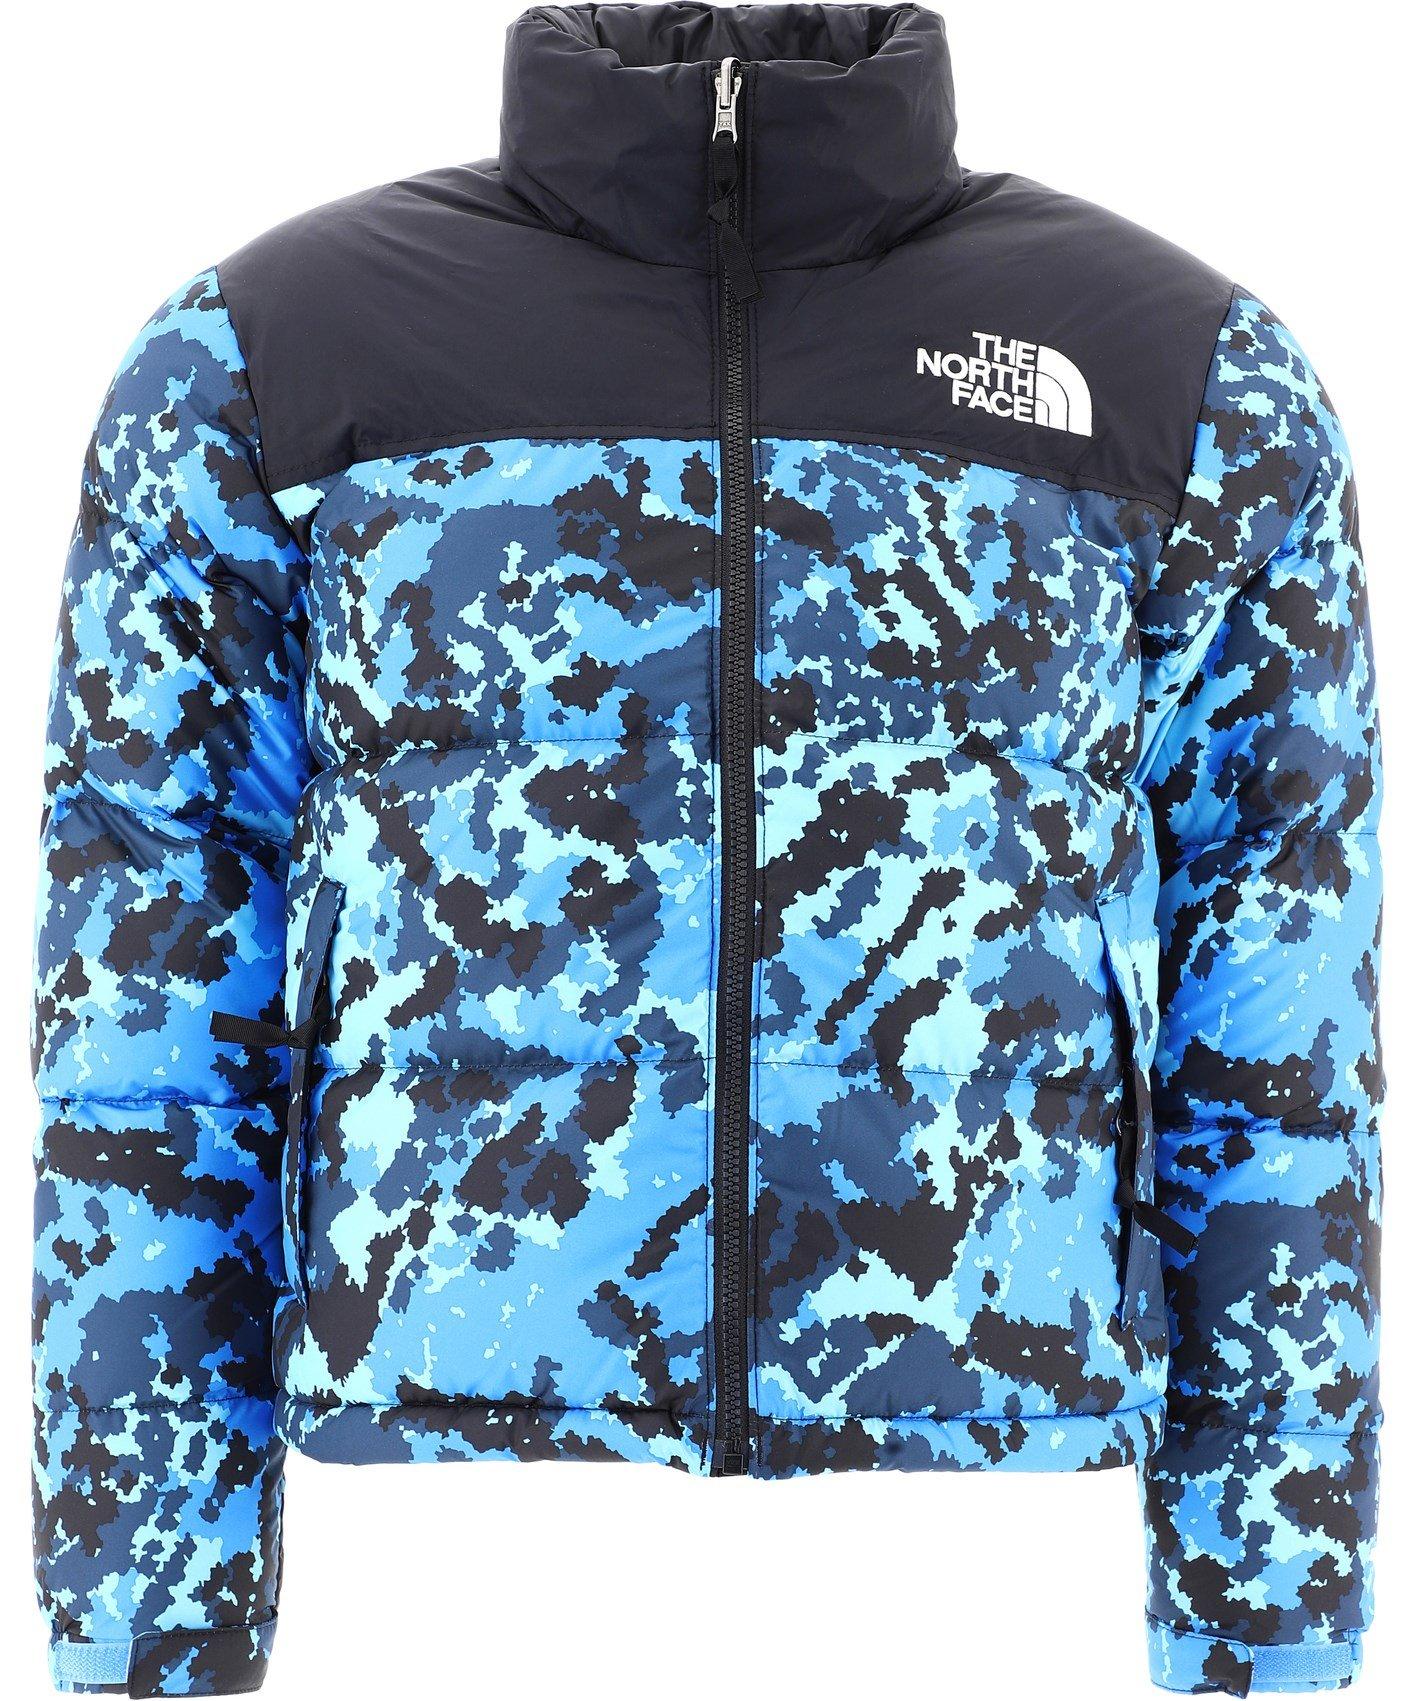 The North Face Goose 1996 Nuptse Jacket in Blue for Men - Lyst